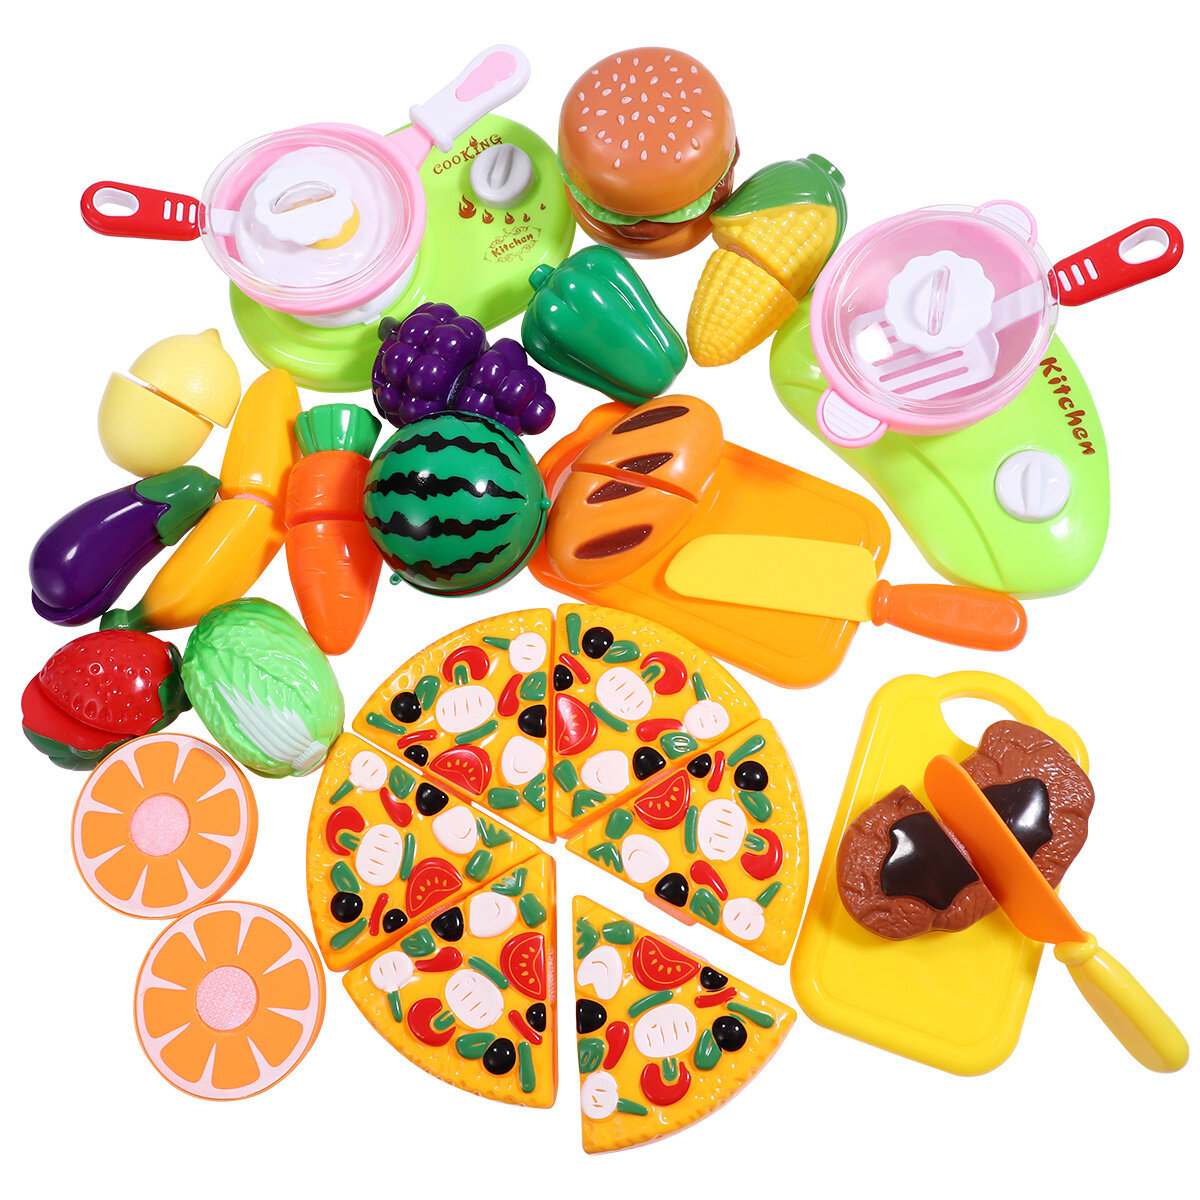 25PCS Play Toy Food Set Kids Pretend Play Grocery Childrens Educational Toys